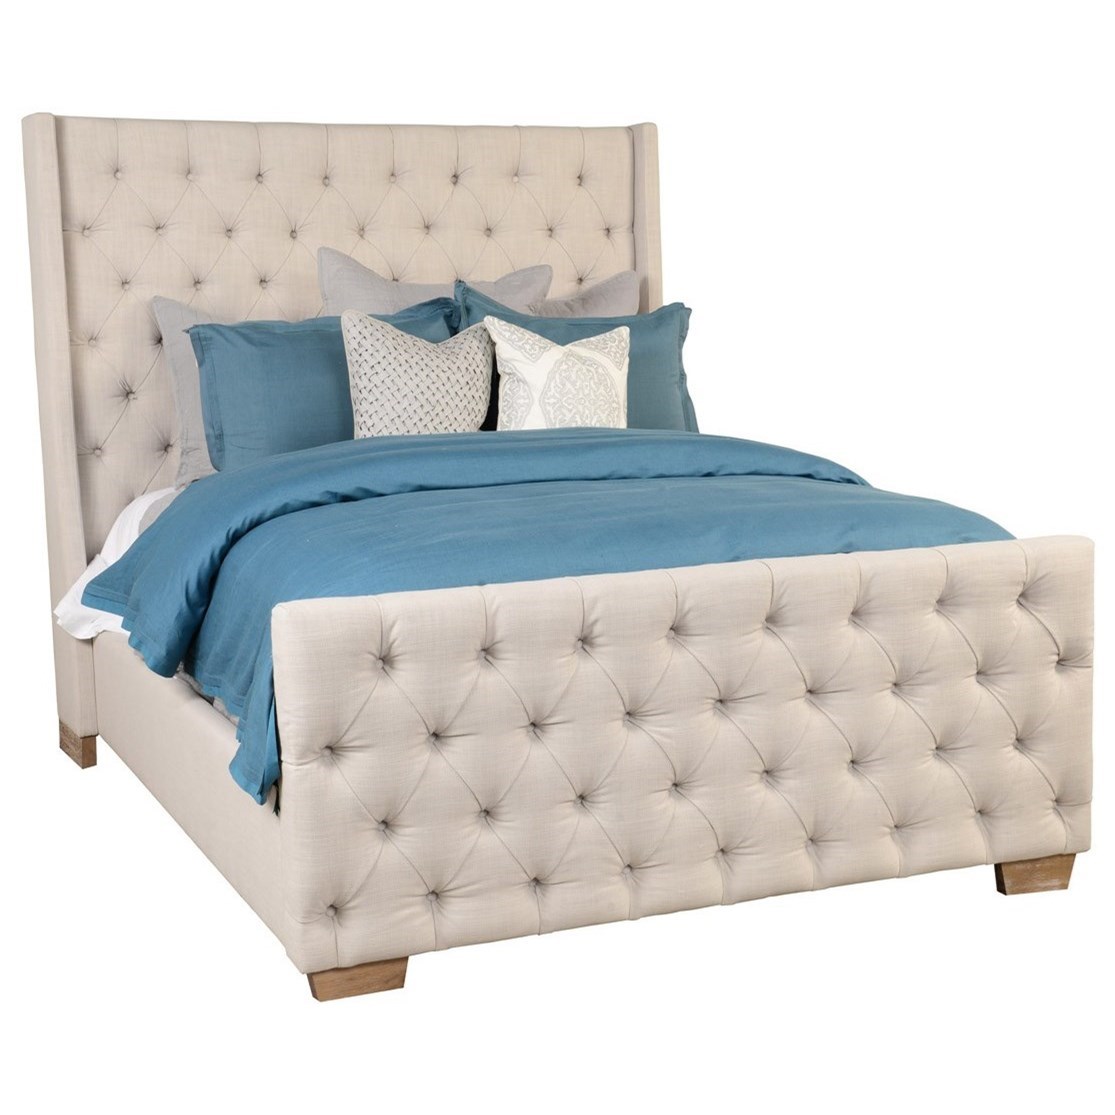 Transitional Rubberwood King Size Platform Bed with Tufted Headboard